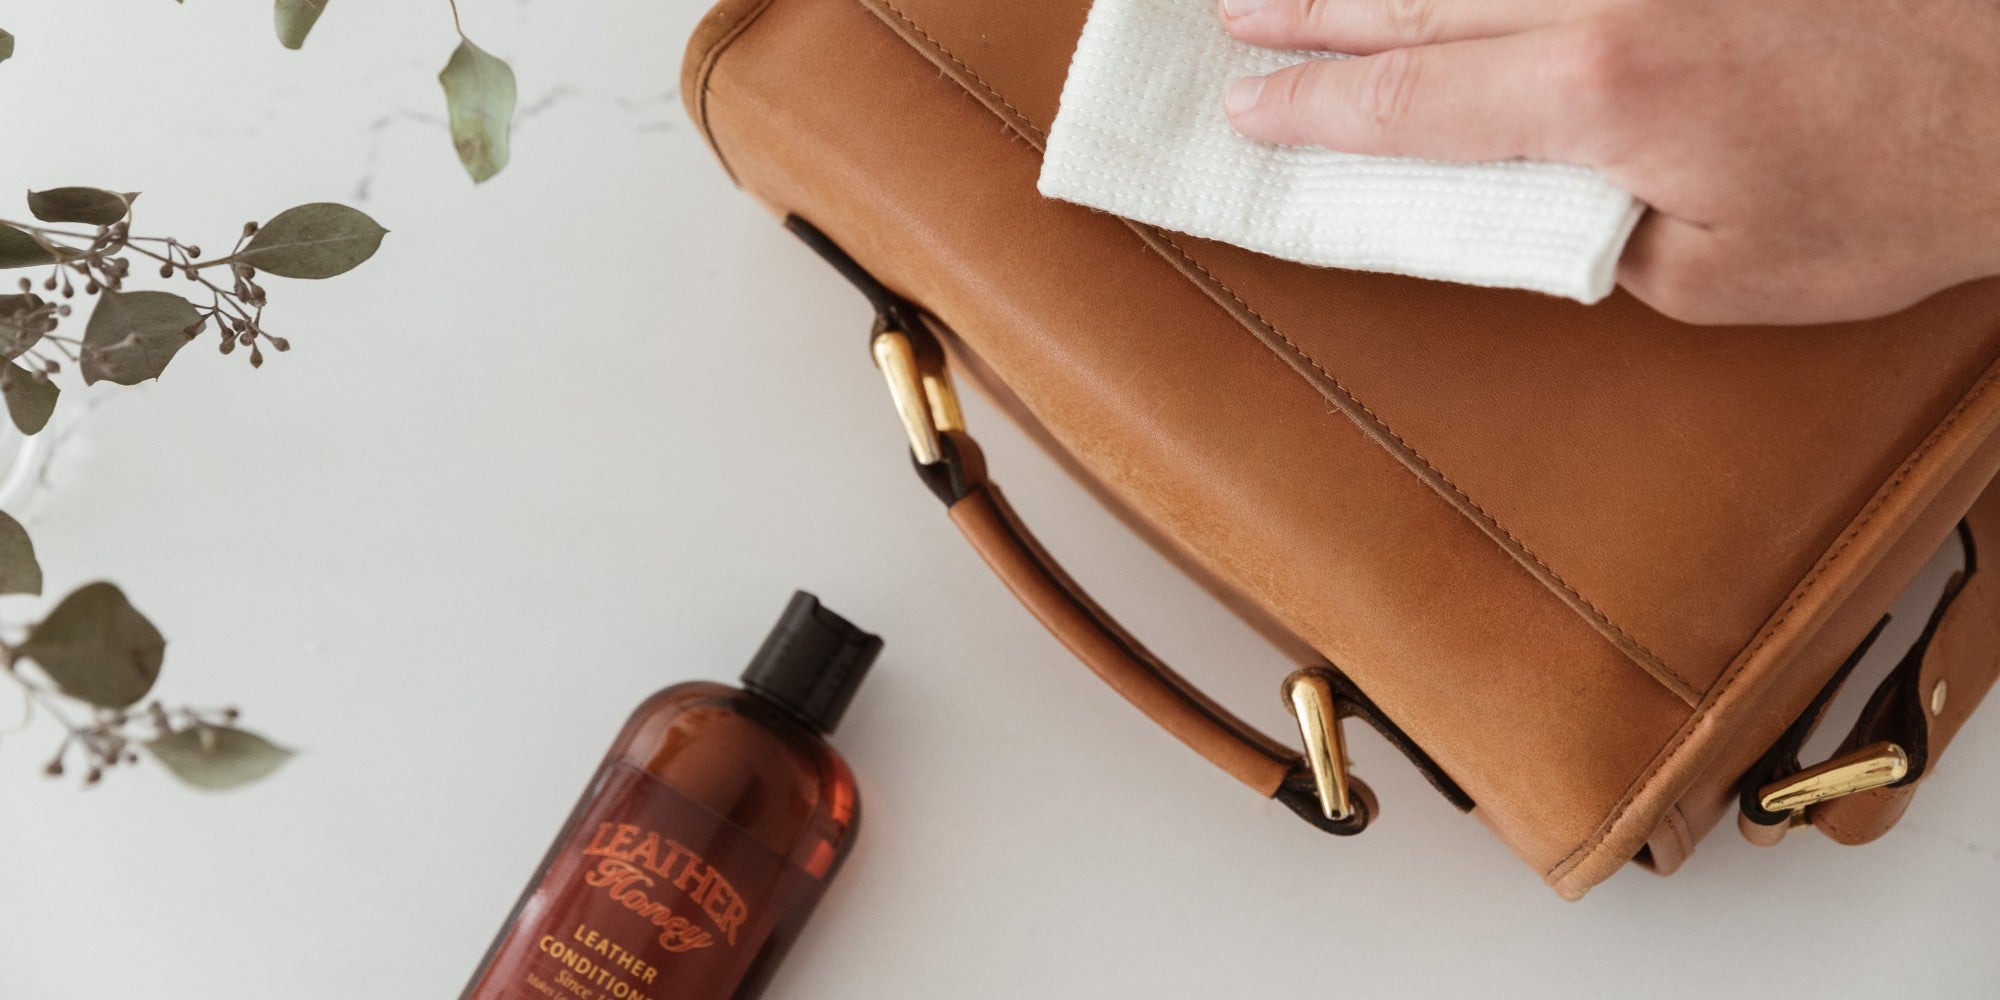 Cleaning Leather Handbags with Leather Conditioner